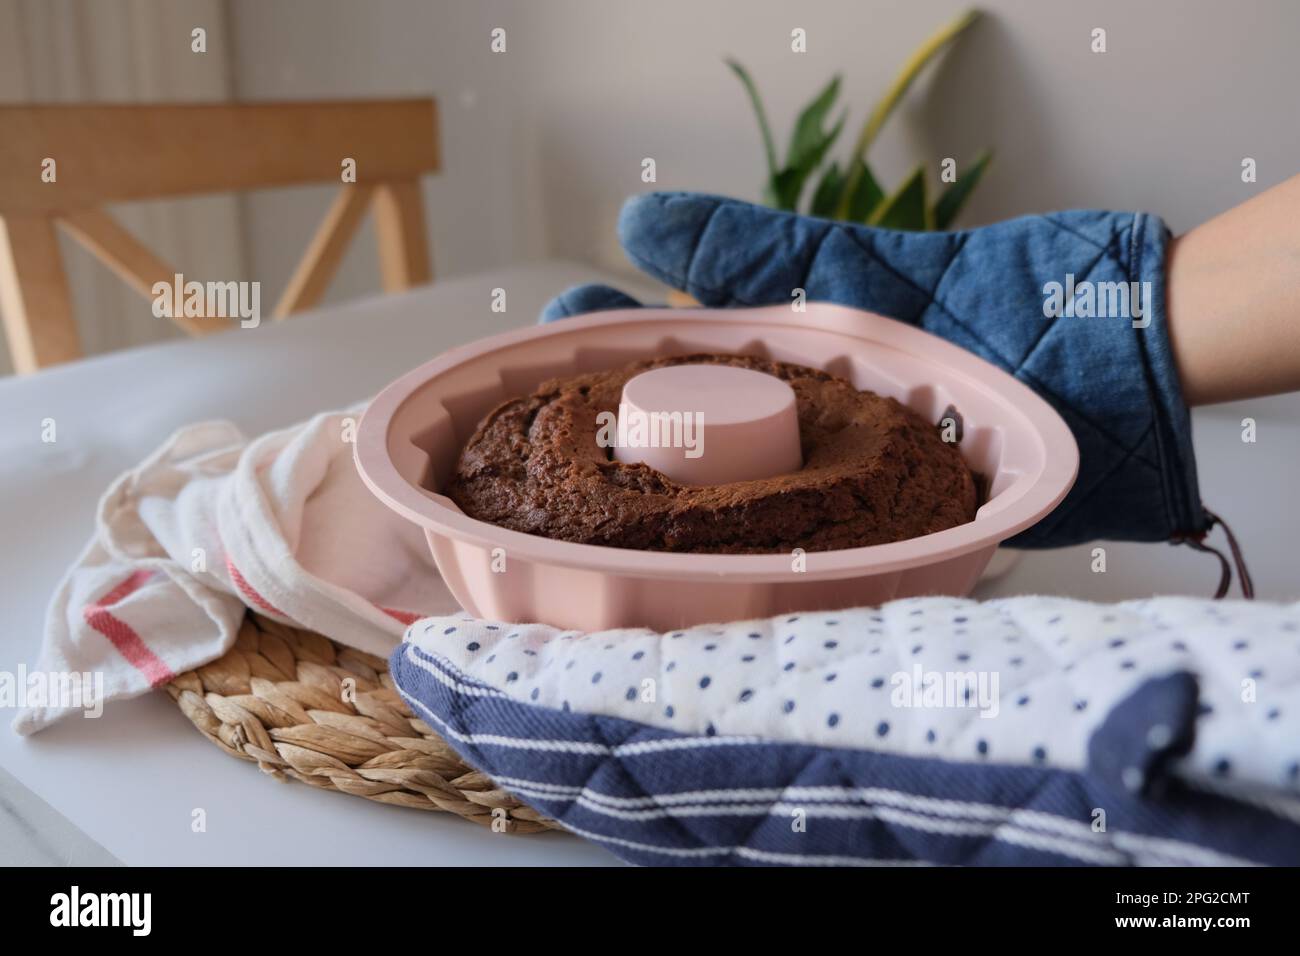 Baked cake, baked cake in a pink round silicone mold between two hands on a white kitchen cloth and placemat in the kitchen. The concept photo. Stock Photo